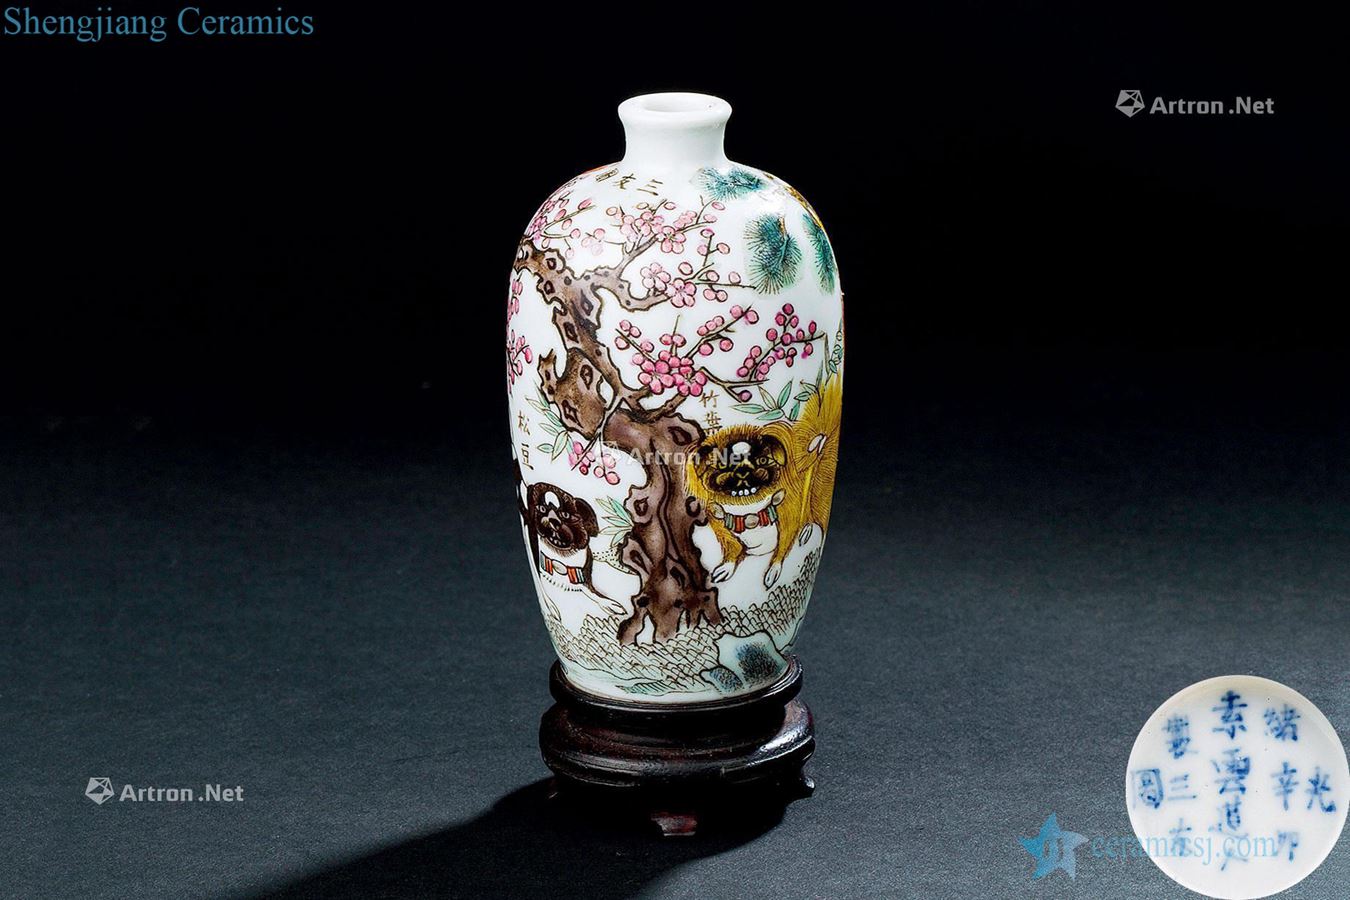 In the qing dynasty (1644-1911), pastel poetic show the small bottle